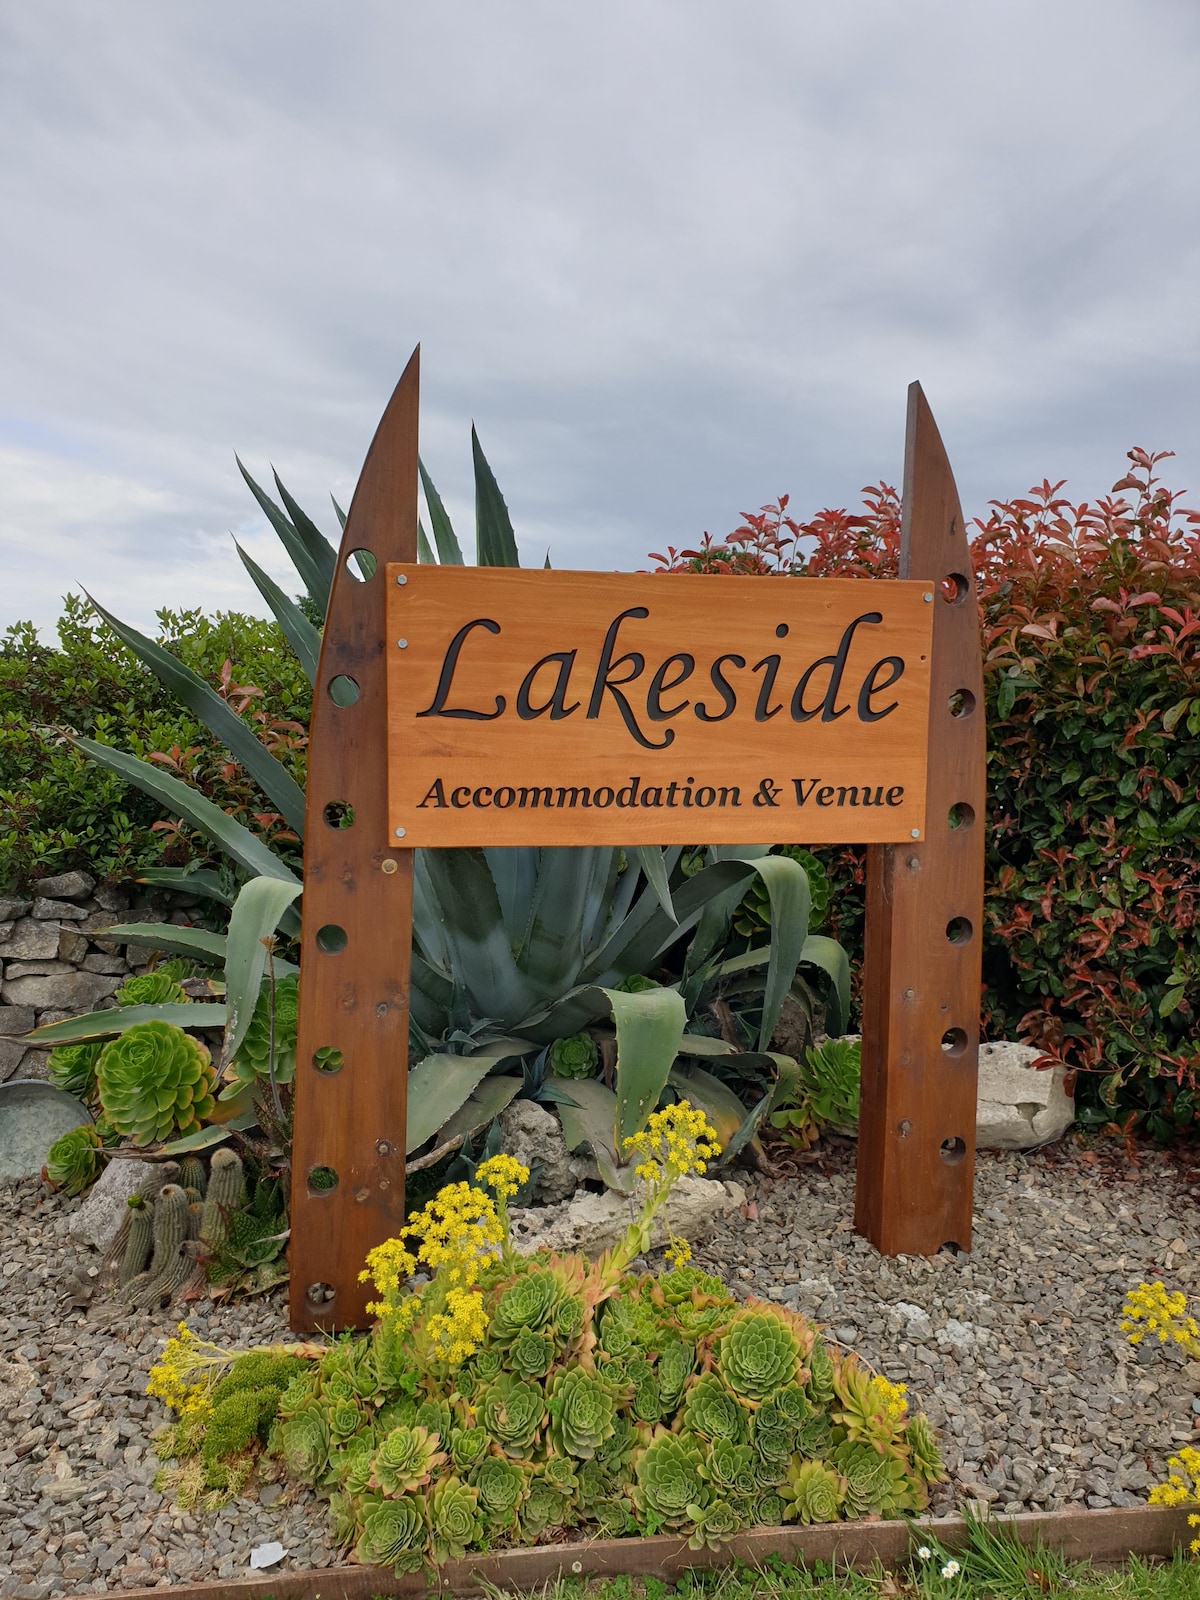 Accommodation at Lakeside and garden venue